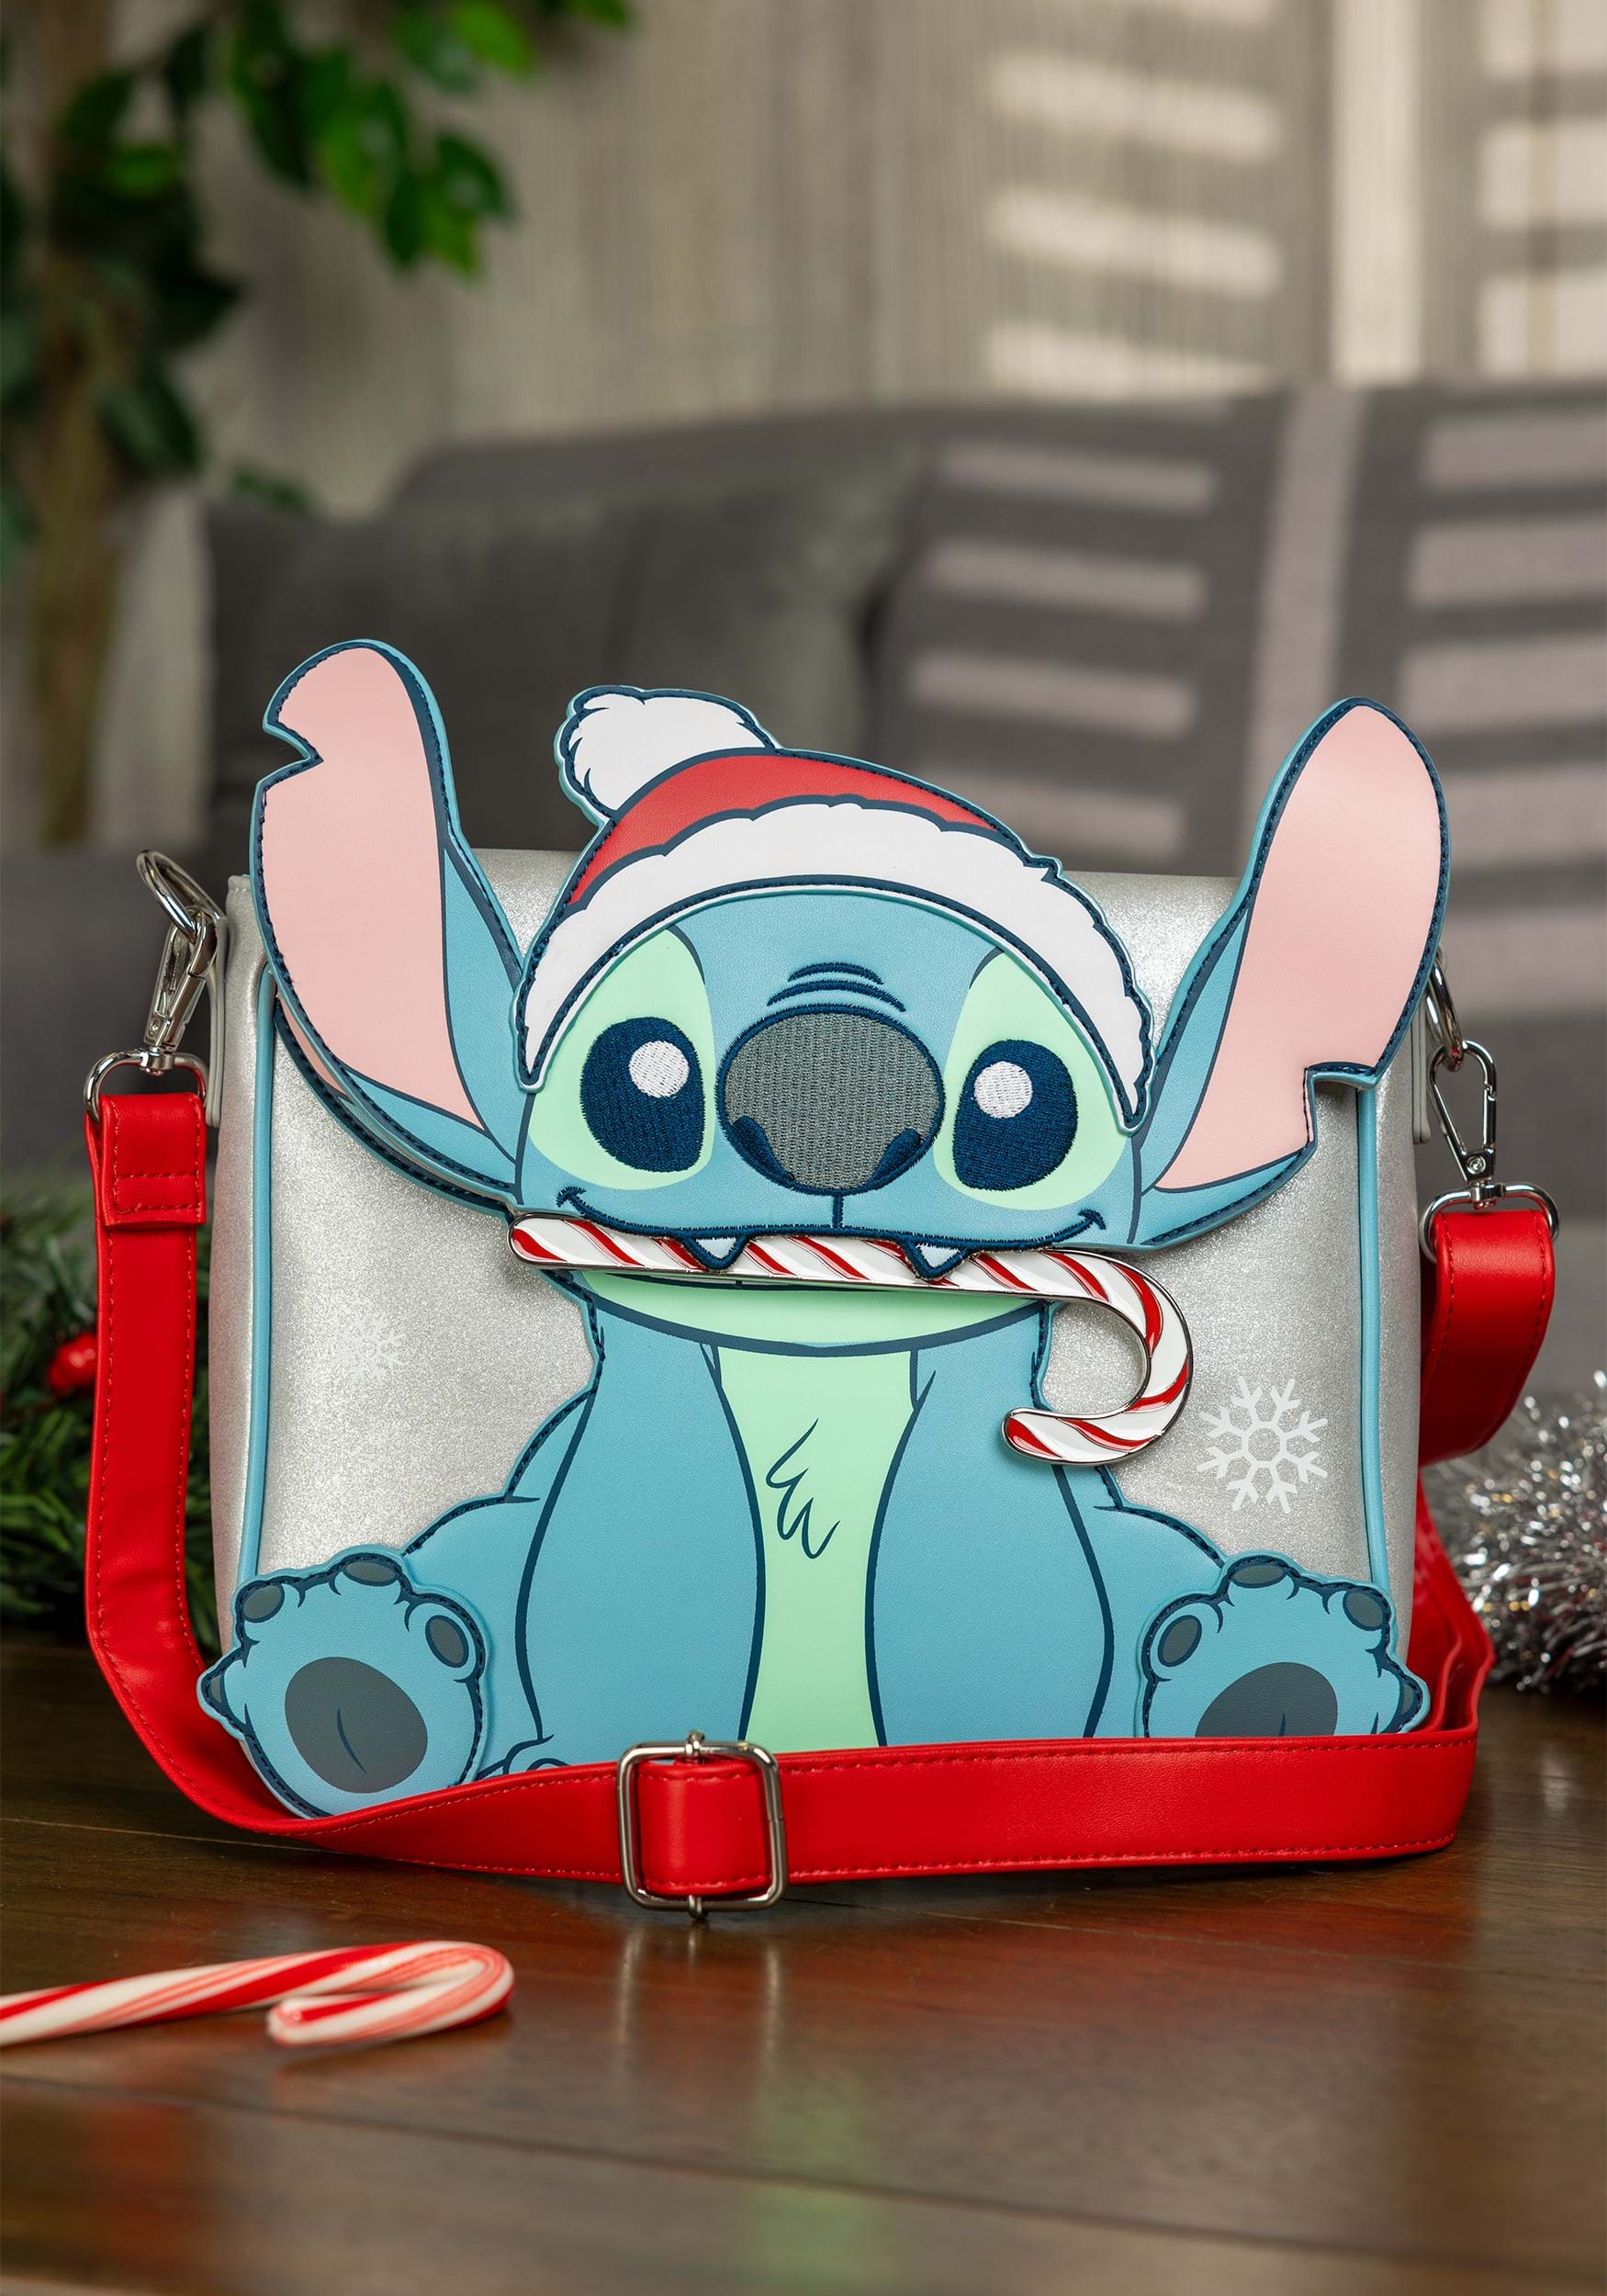 https://images.fun.com/products/94185/1-1/loungefly-disney-stitch-holiday-cosplay-crossbody-bag.jpg